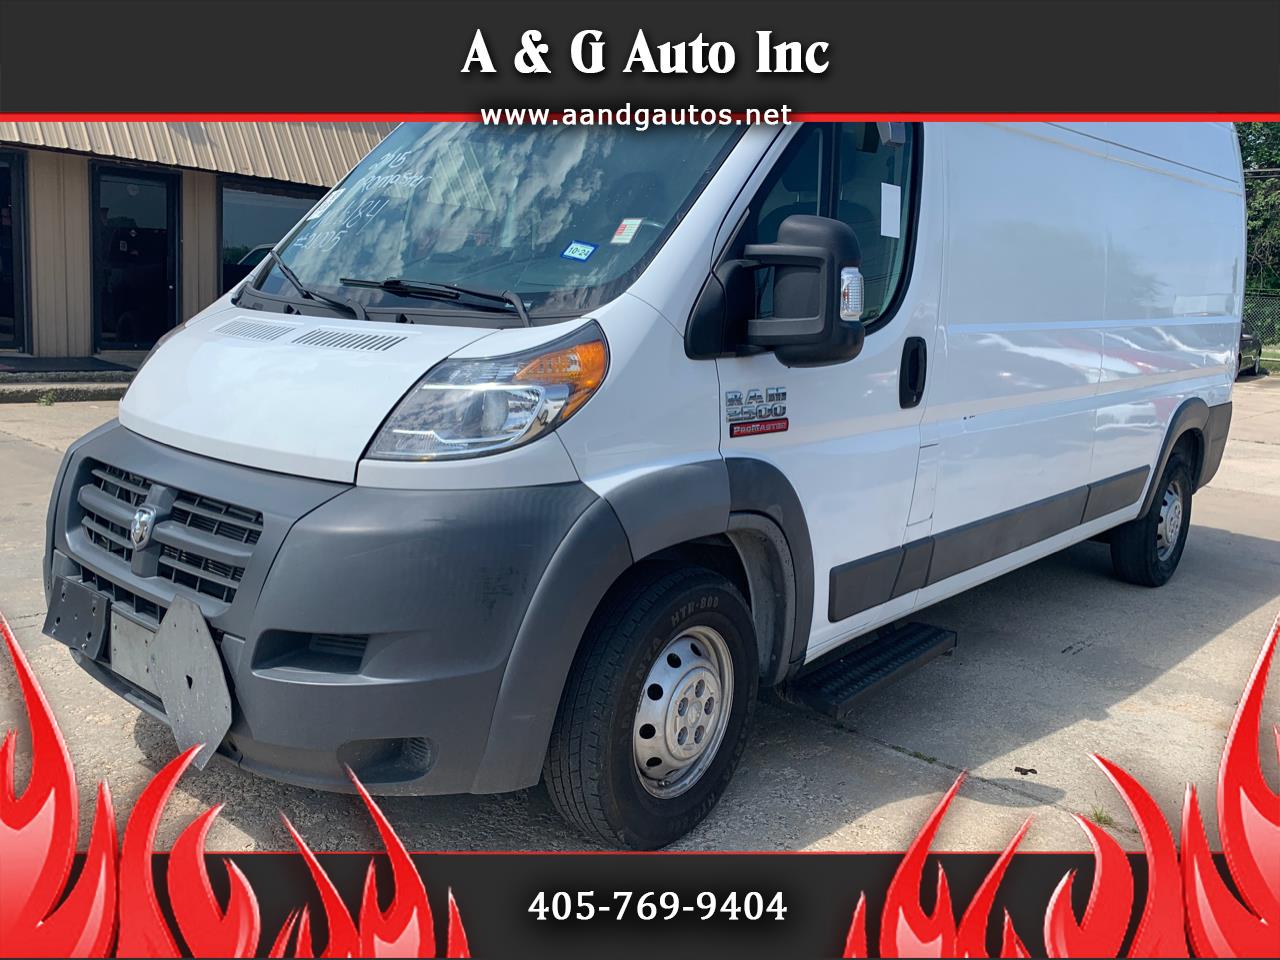 2015 RAM Promaster for sale in Oklahoma City OK 73141 by A & G Auto Inc